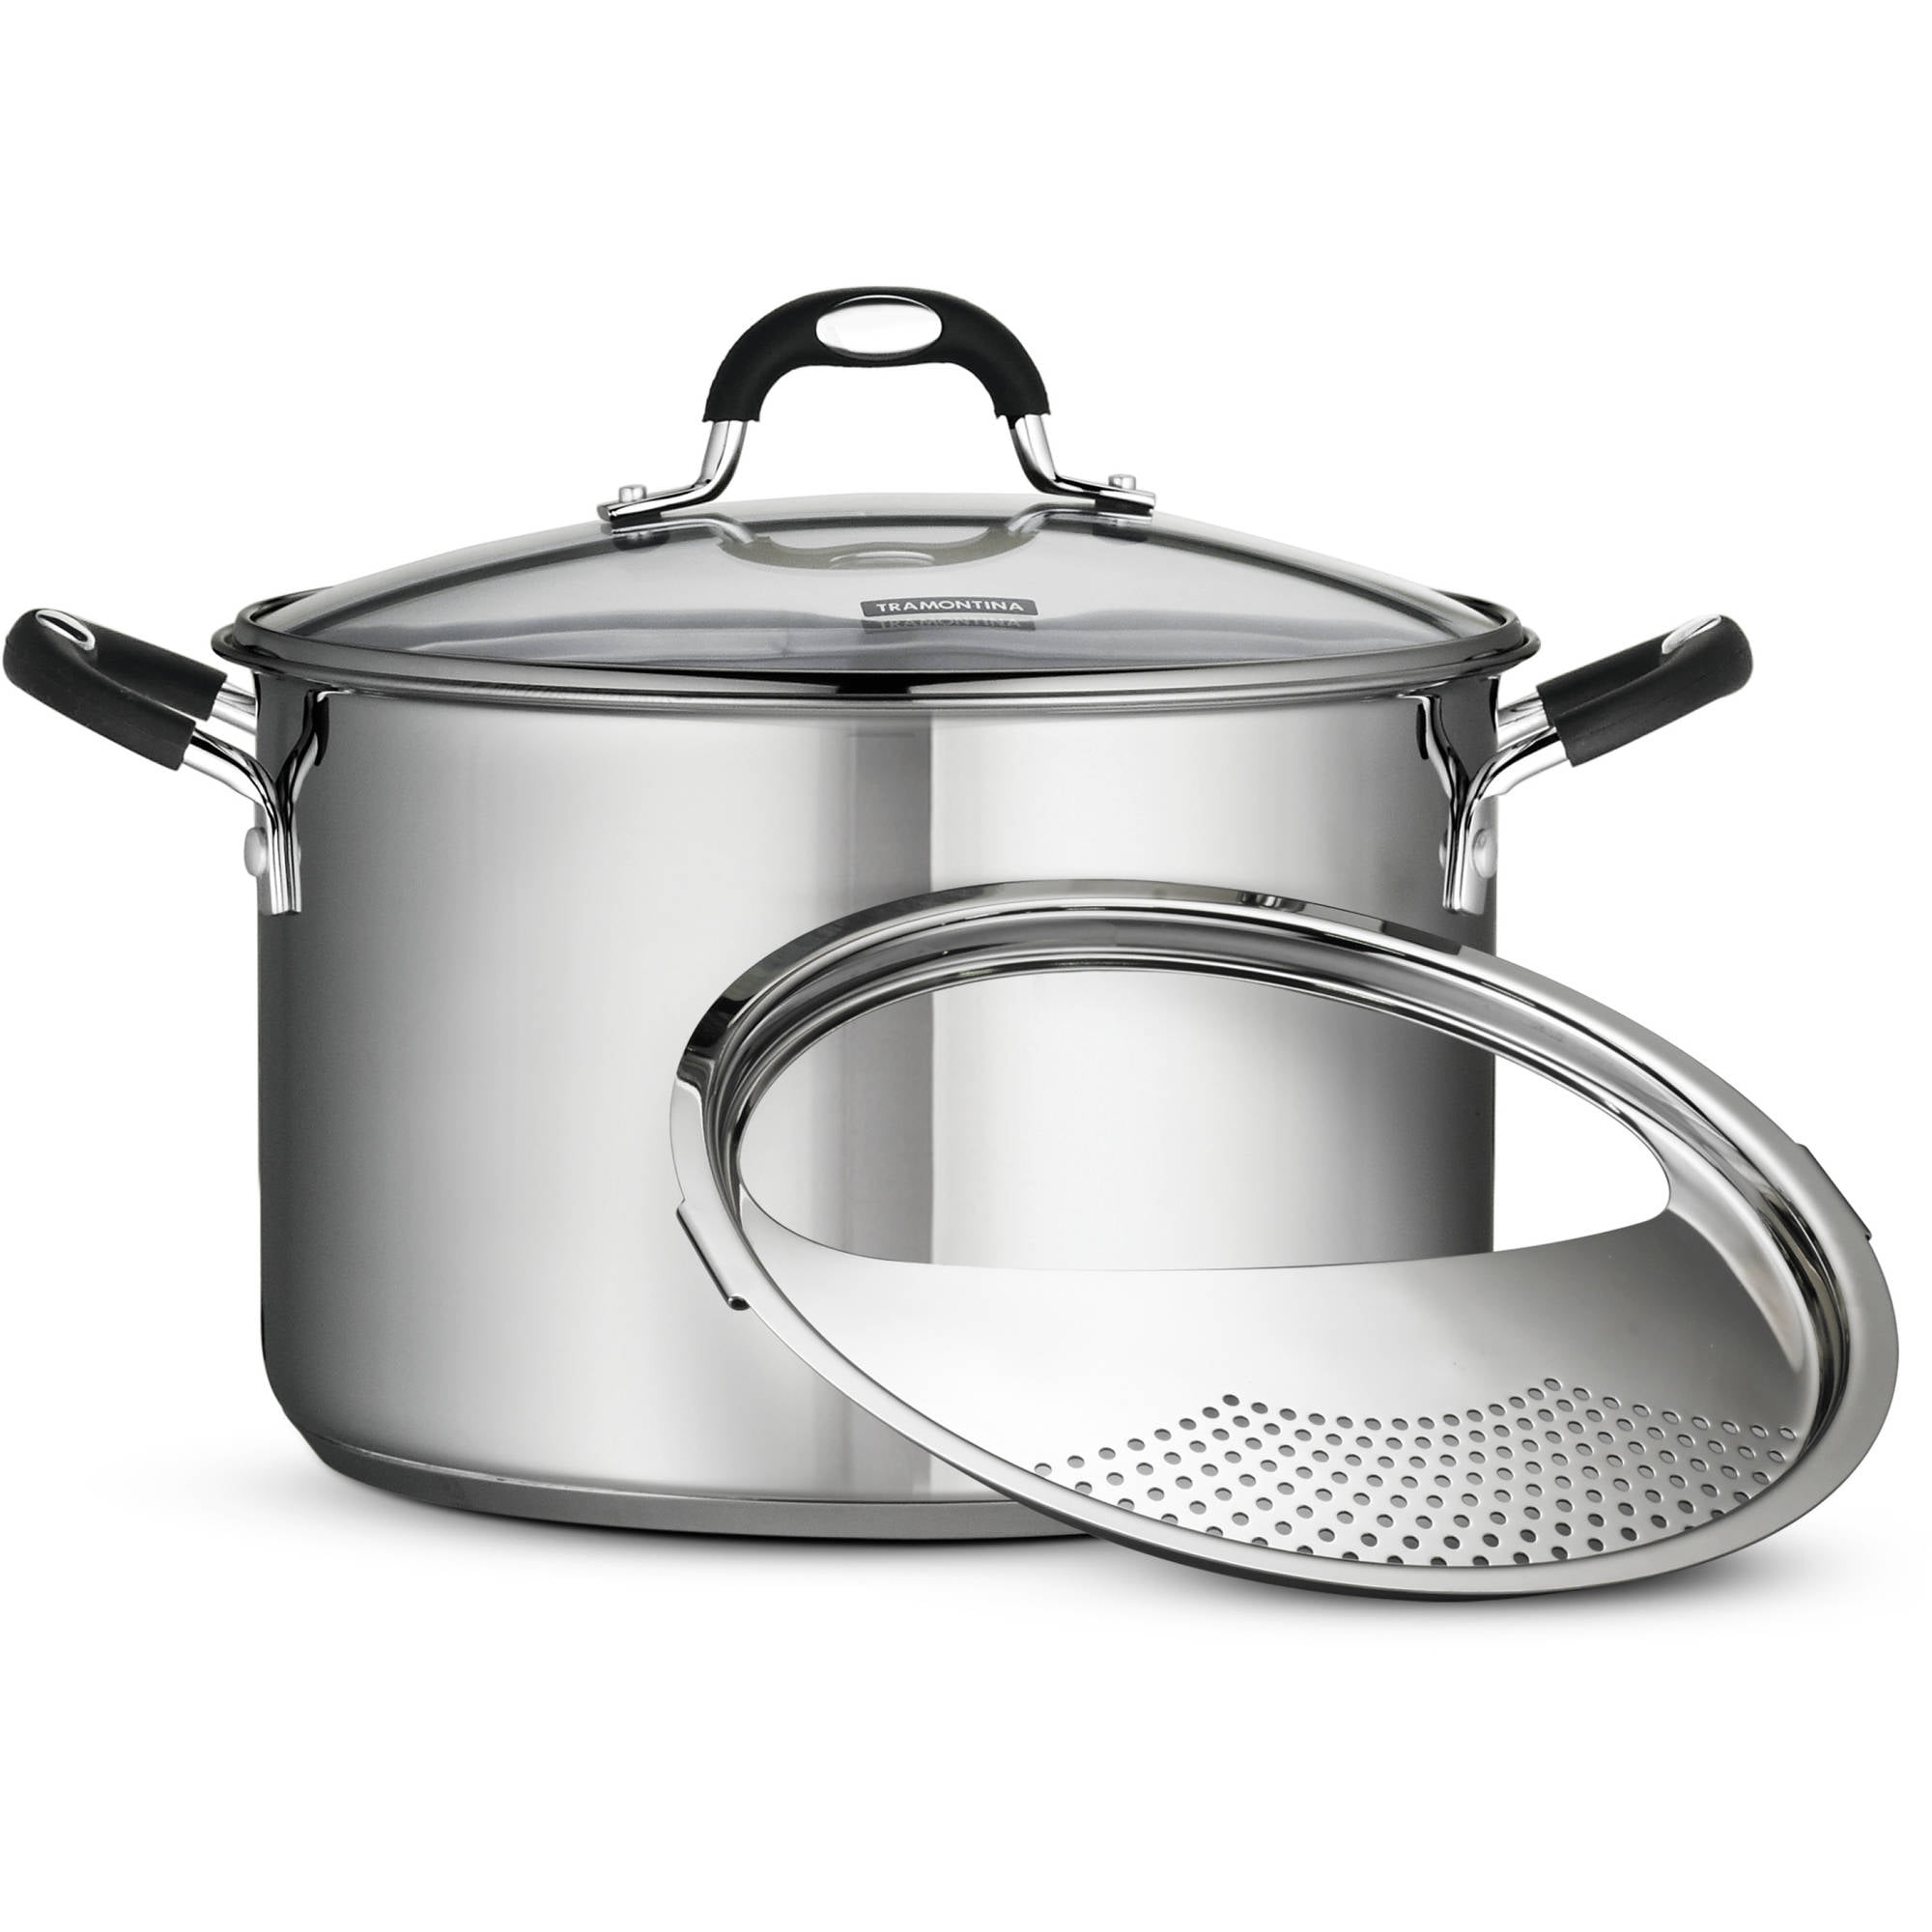 Tramontina Lock-N-Drain Durable Stainless Steel 6Quart Covered Stock Pot,3 Count 